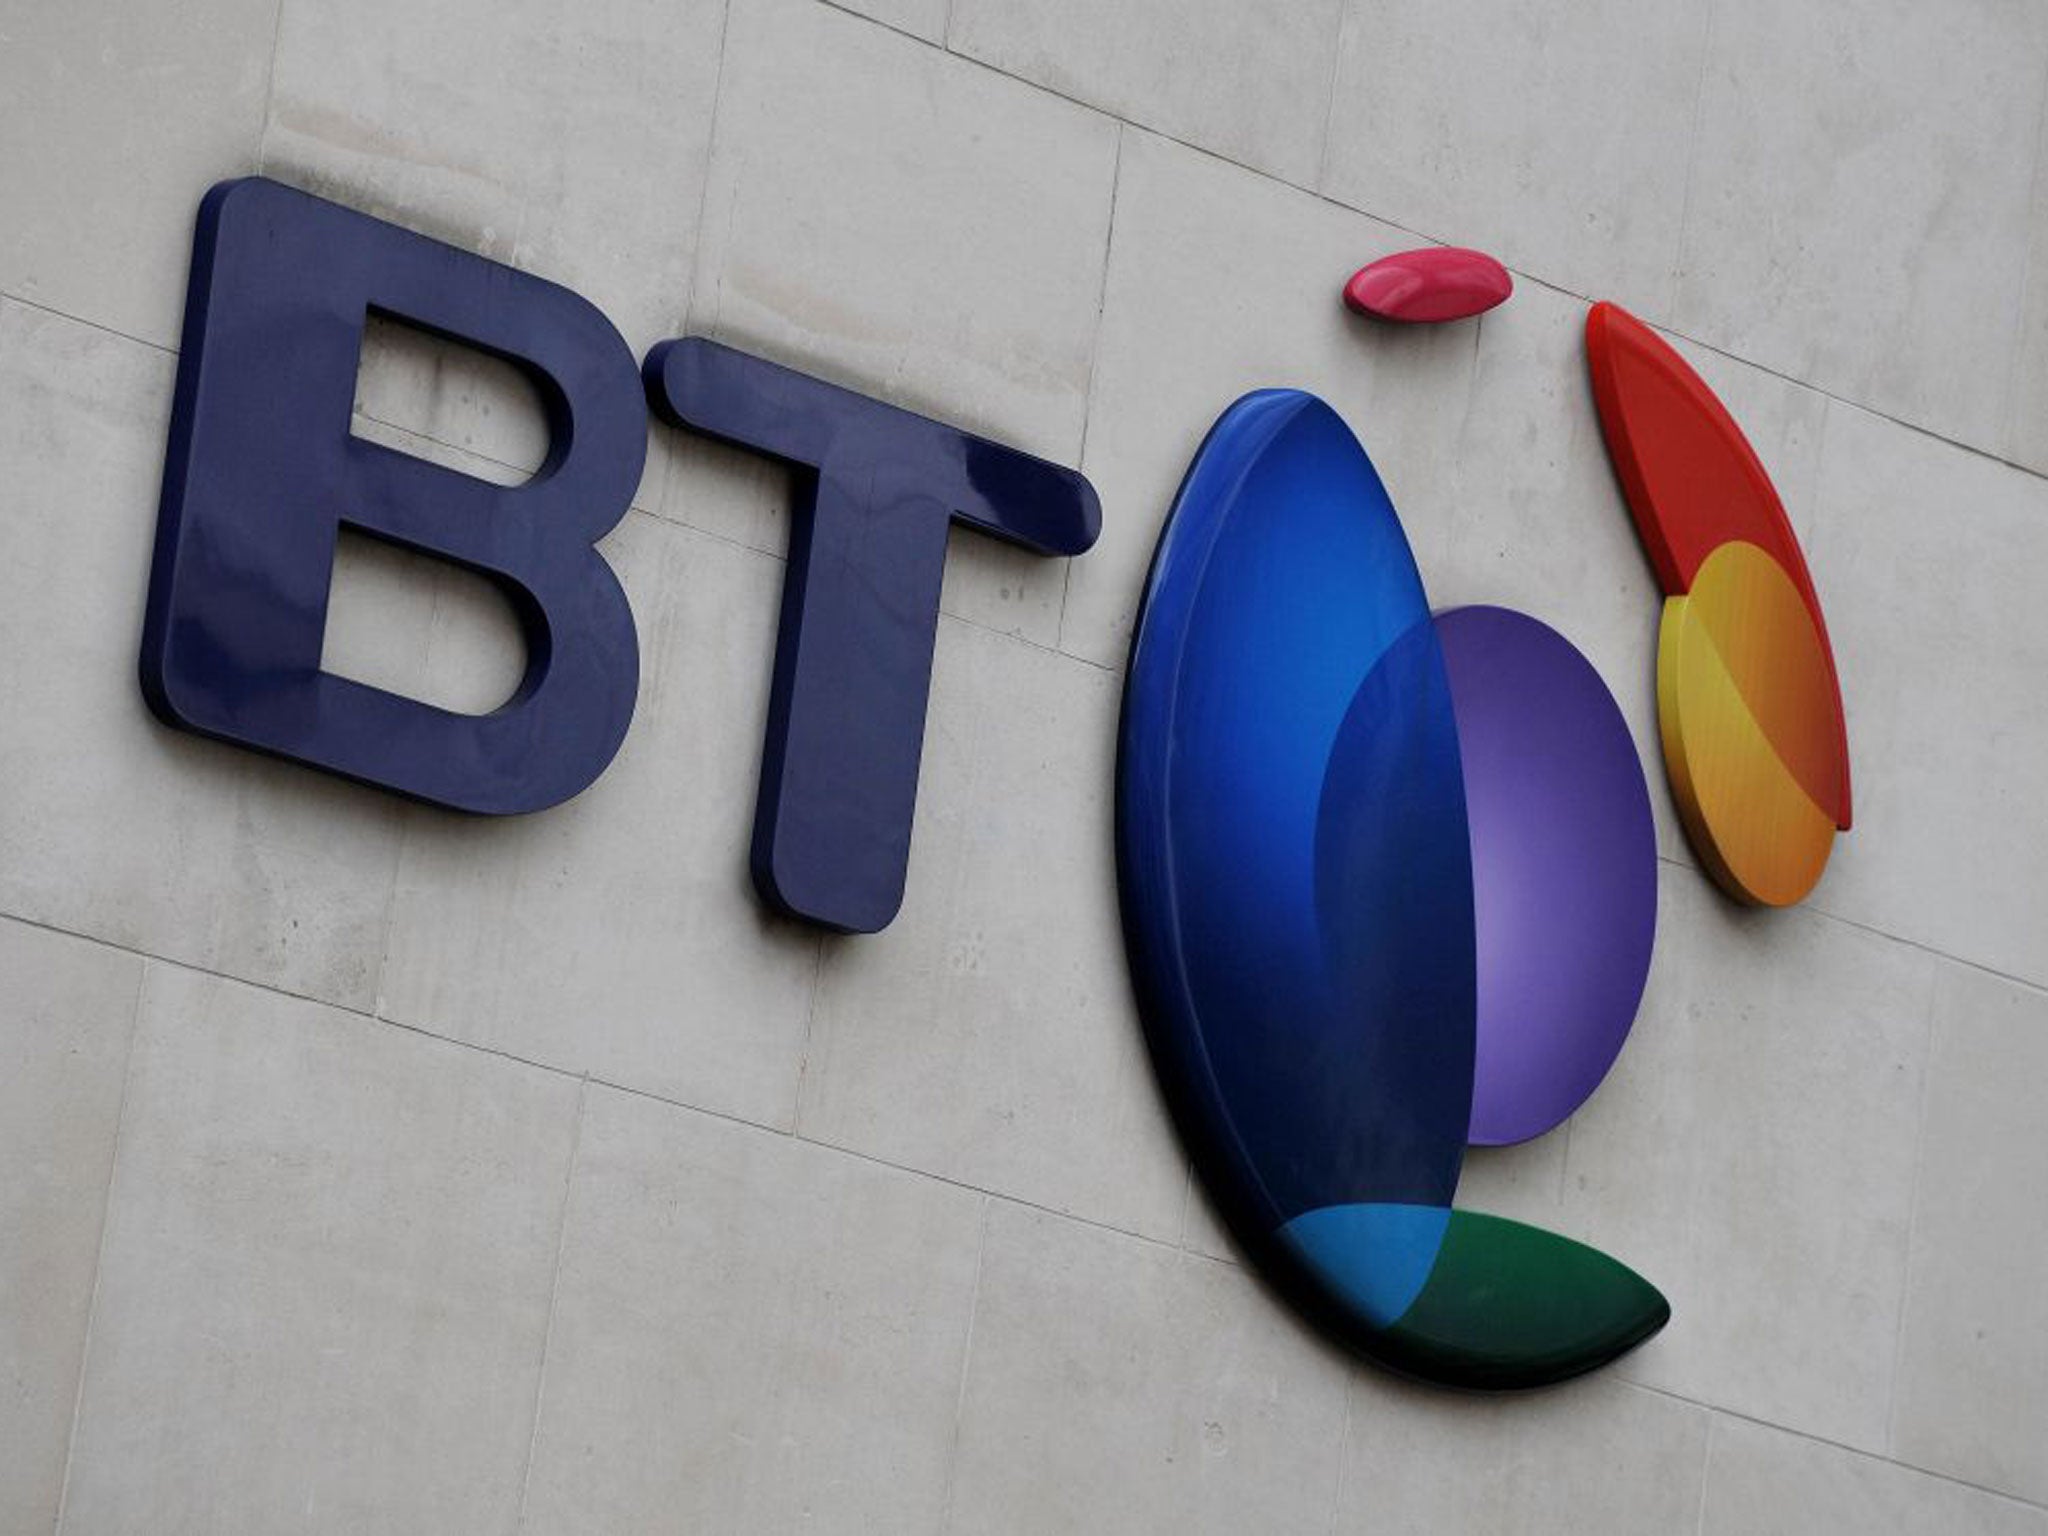 BT has announced its bills will increase by up to 6.5 per cent